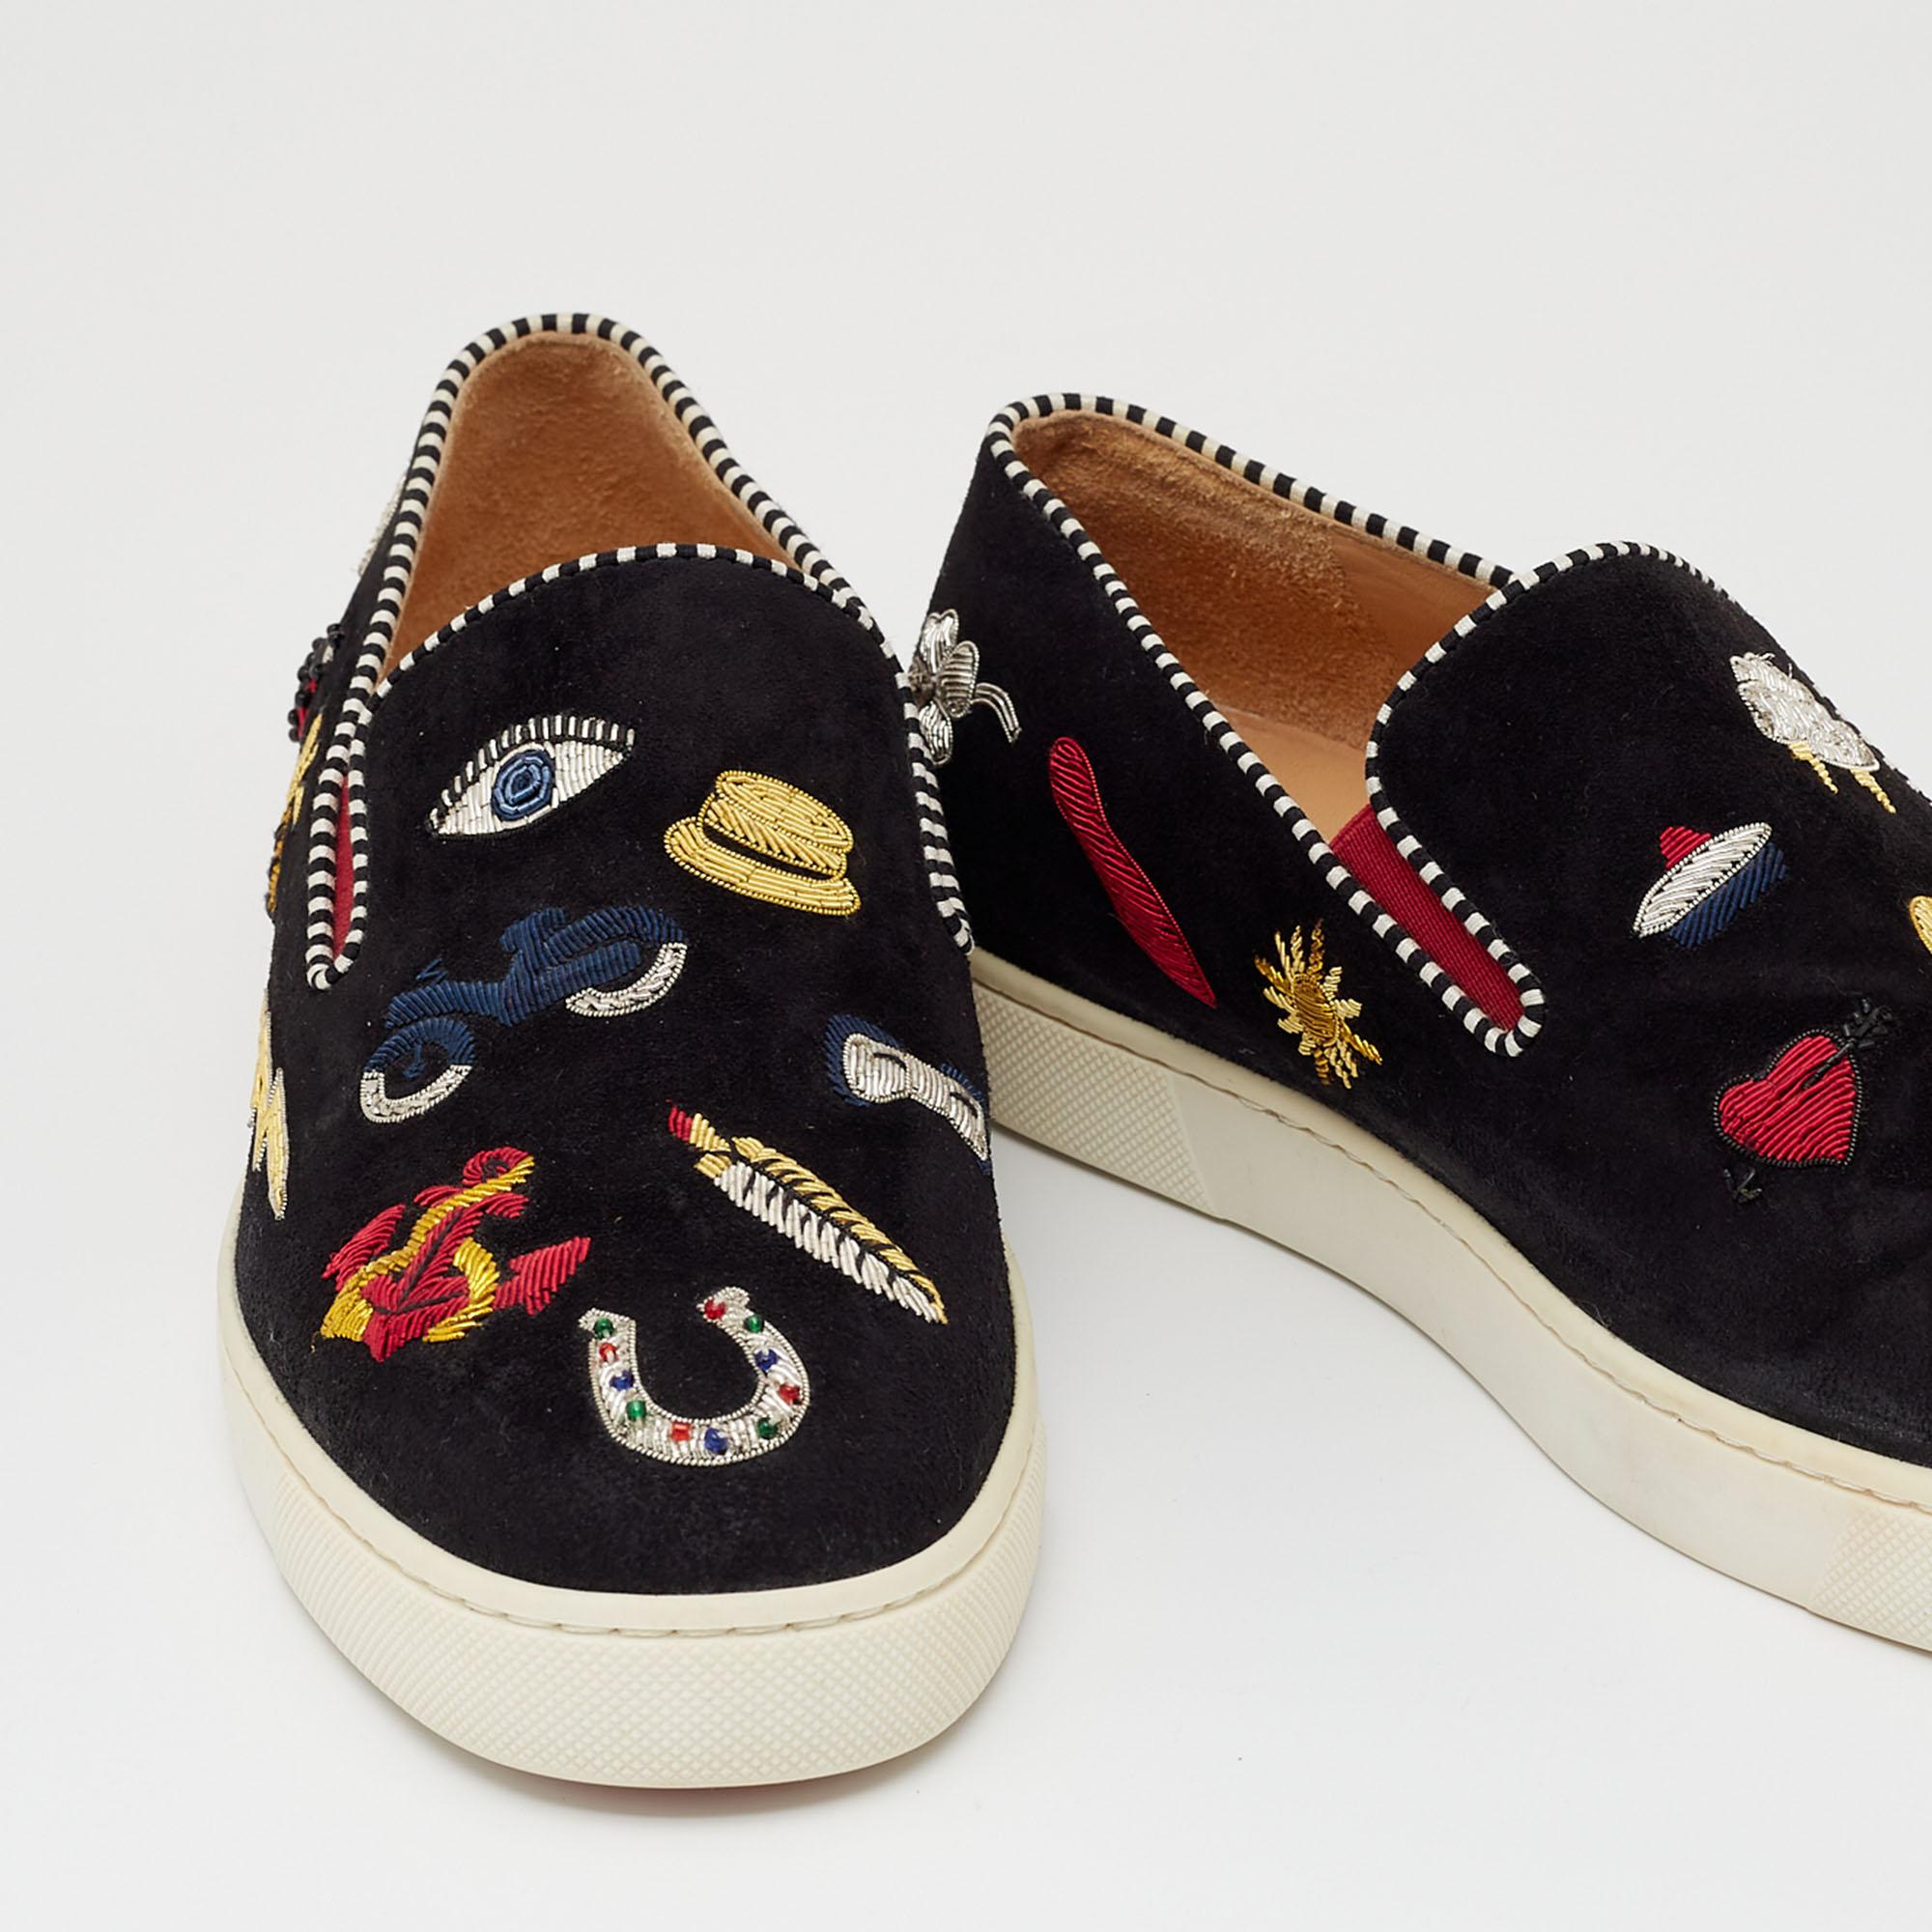 Christian Louboutin Black Suede Embellished Pik N Luck Slip-on Sneakers Size 37 1